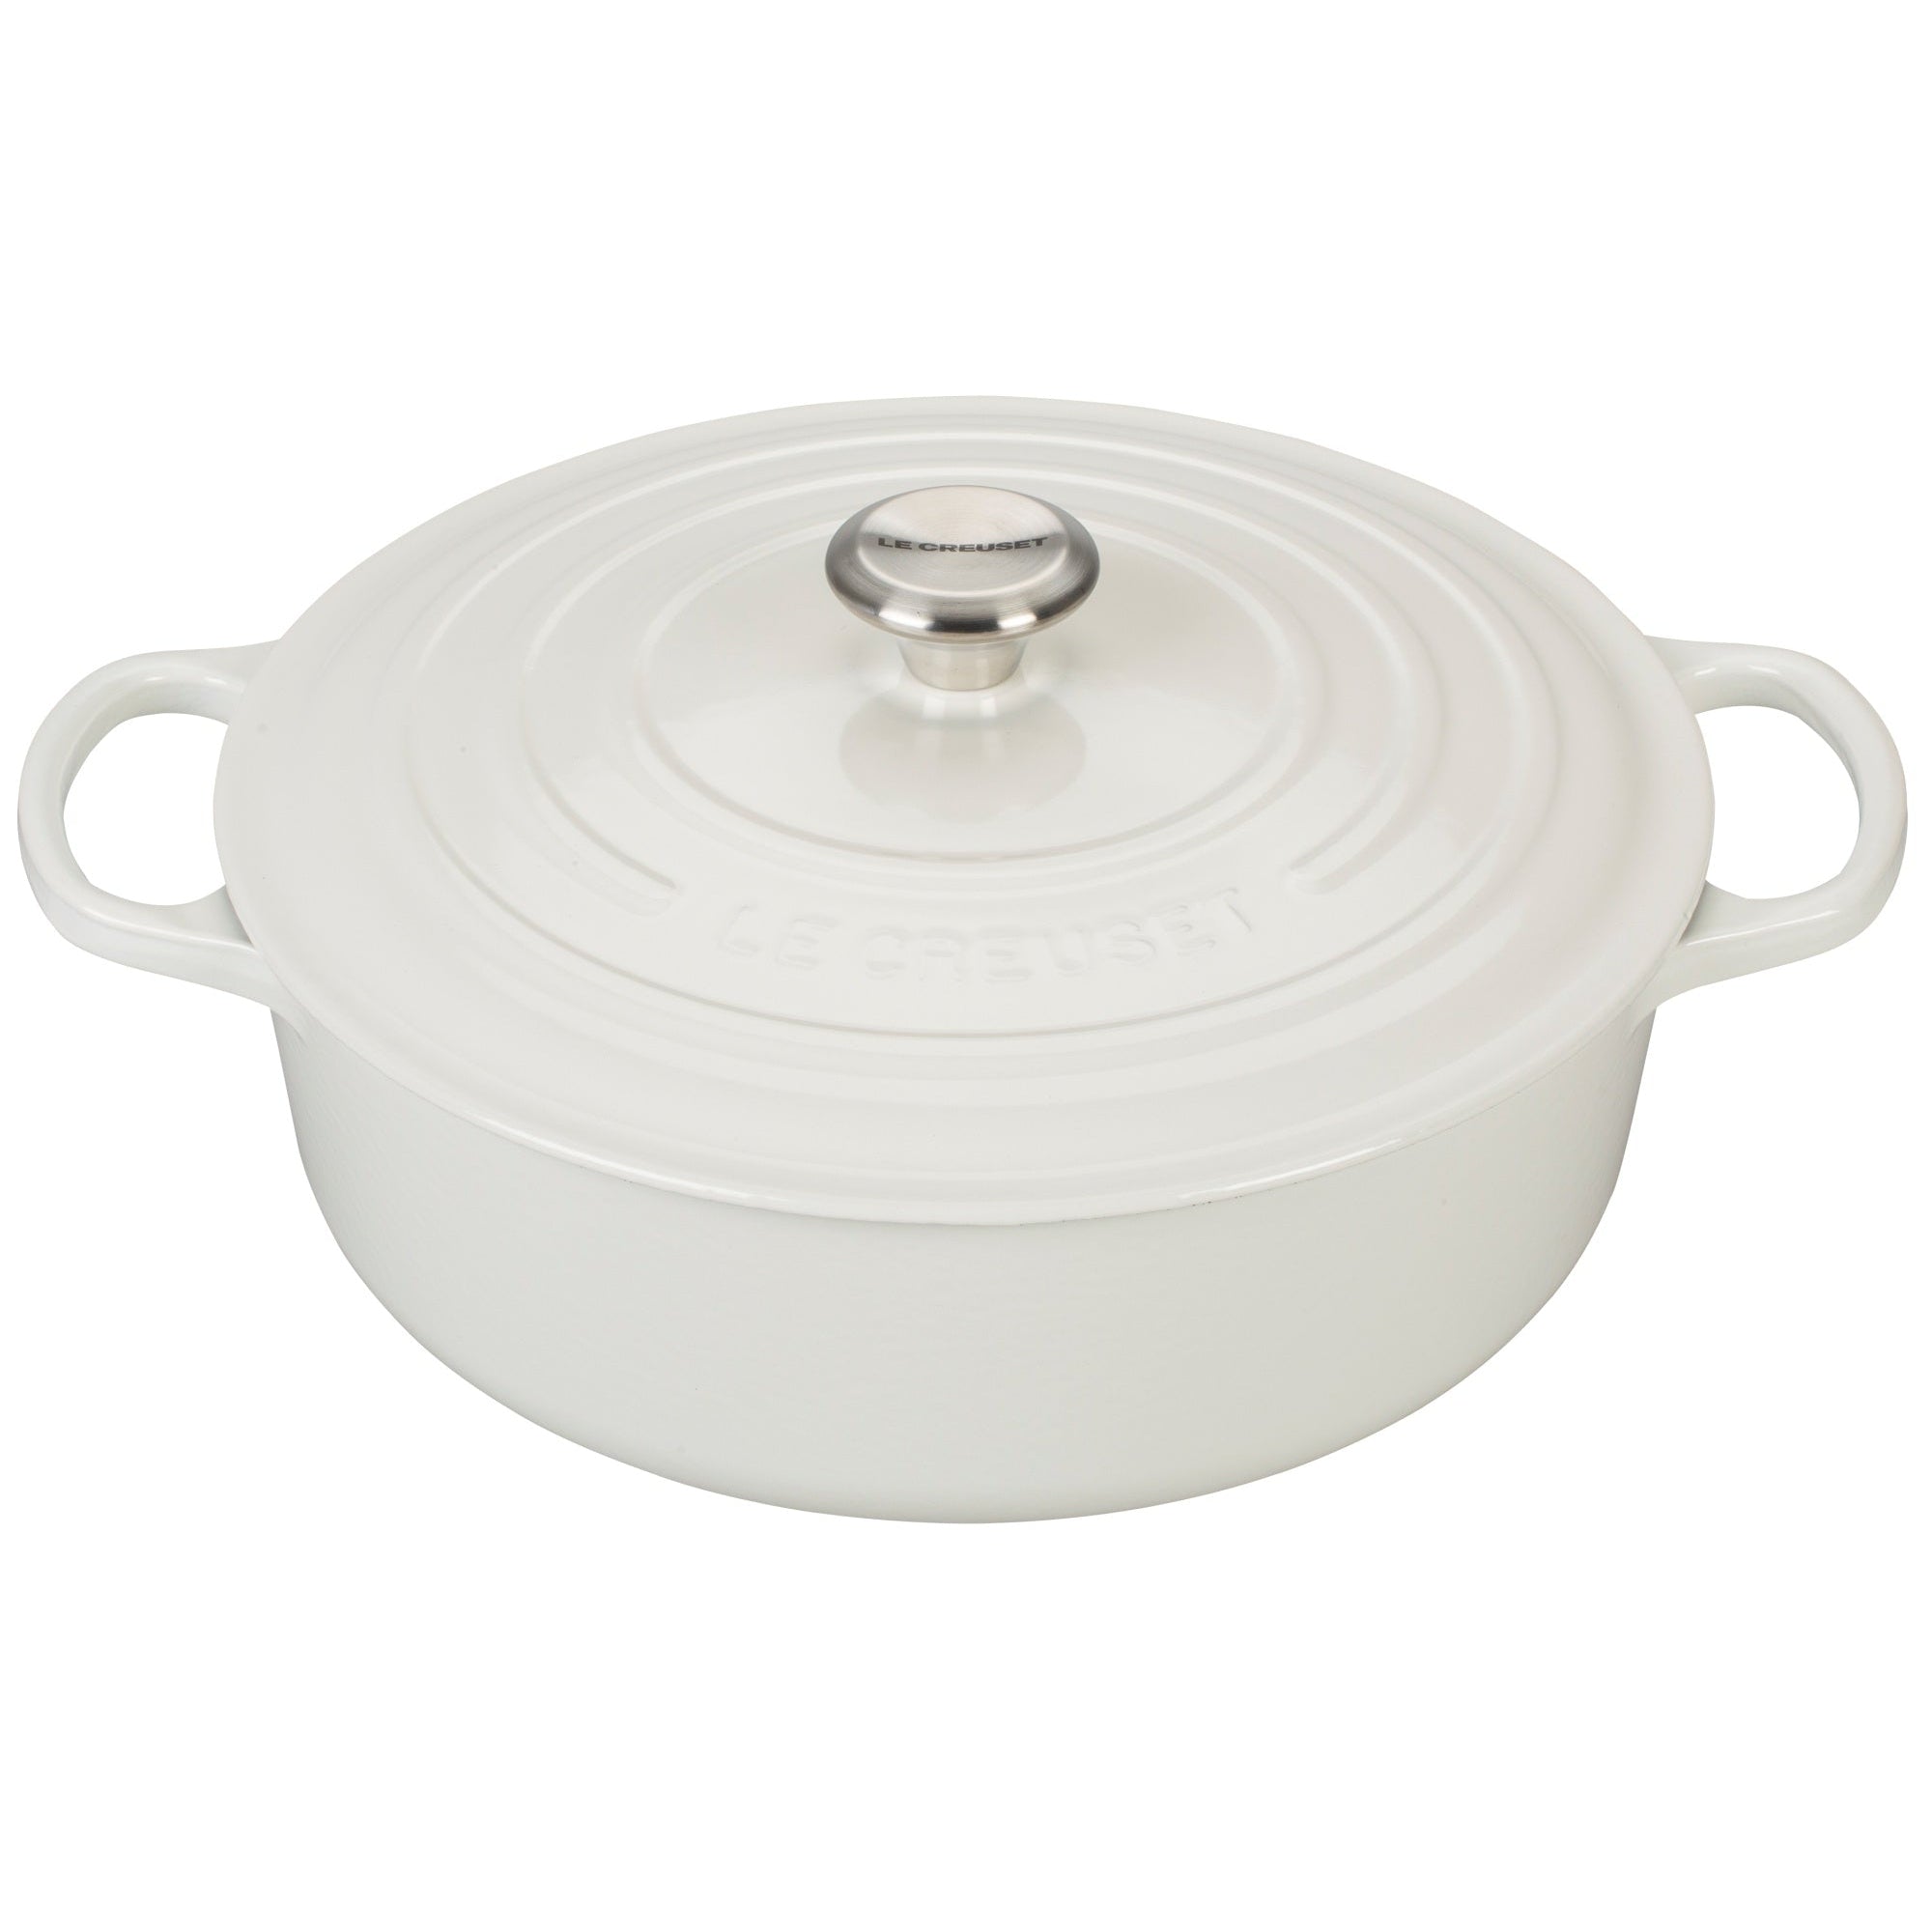 Le Creuset - 6.2L White Shallow Risotto French / Dutch Oven (30 cm)